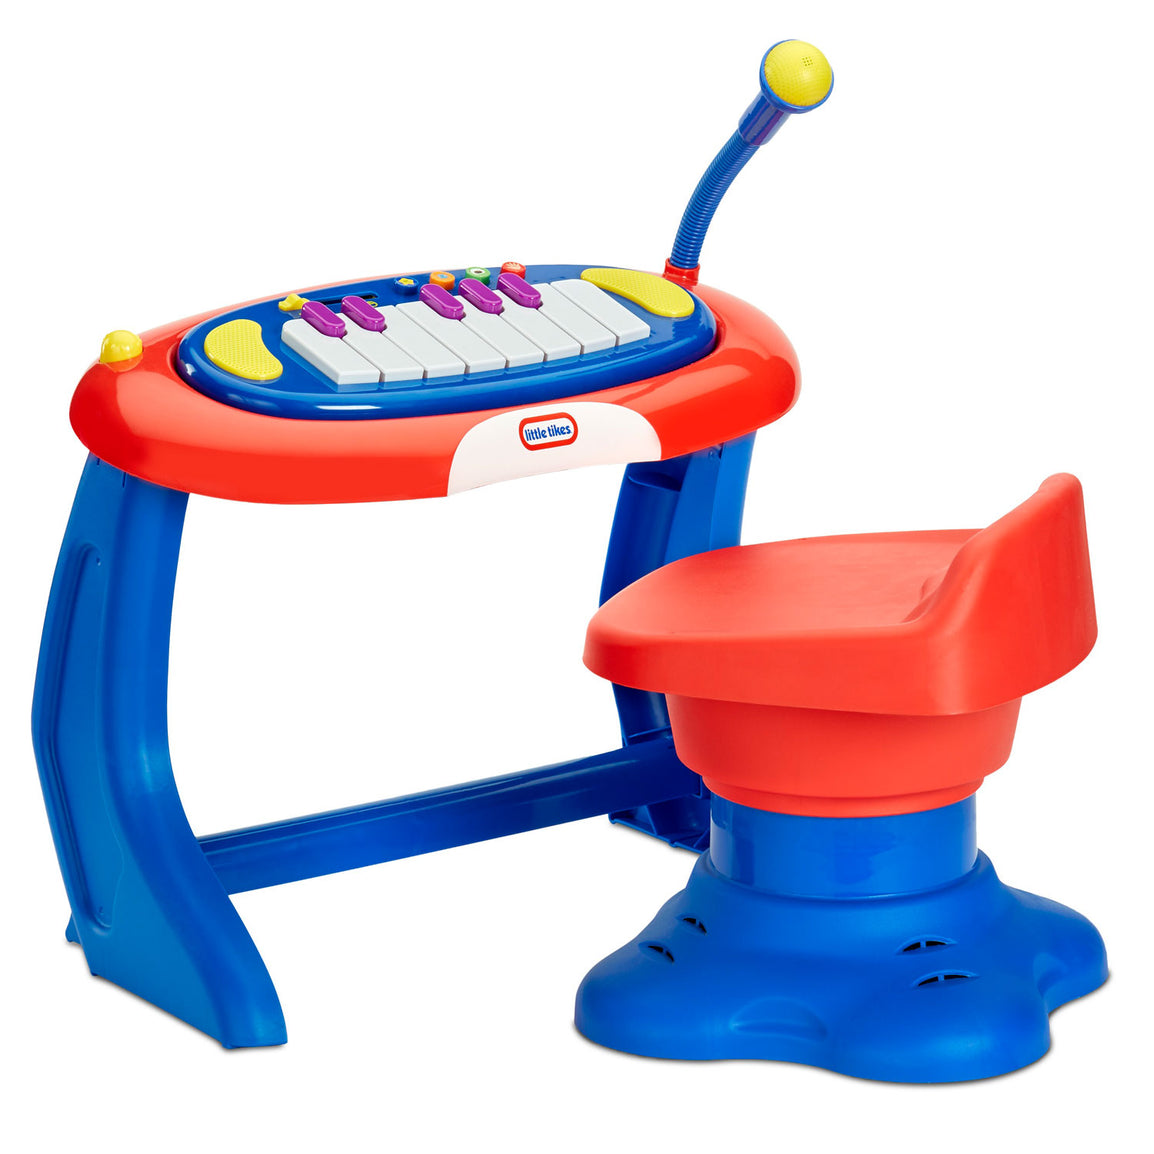 Sing-a-Long Piano - Official Little Tikes Website